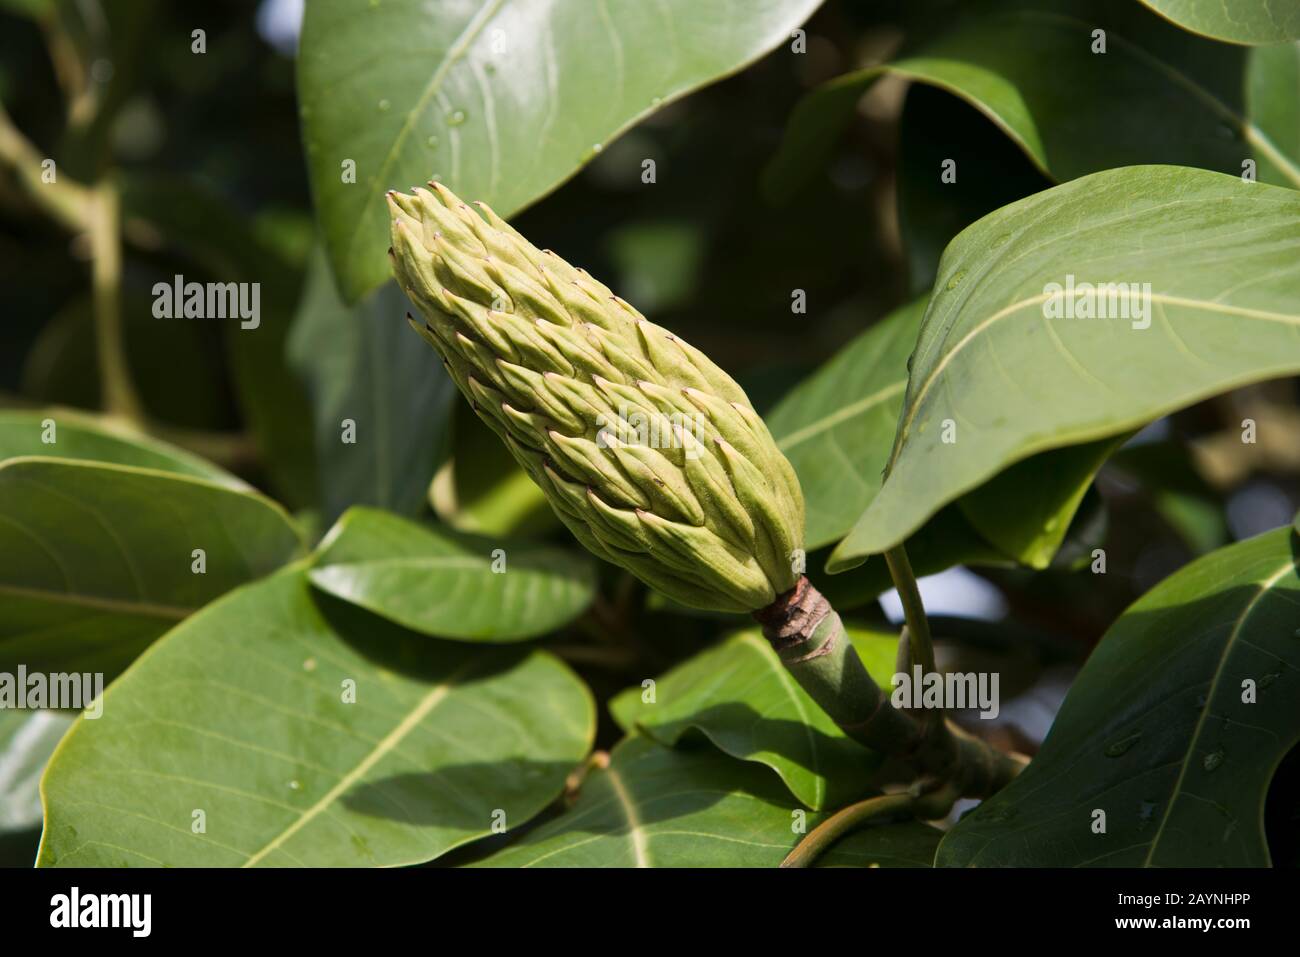 Magnolia delavayi showing flower bud and leaves Stock Photo